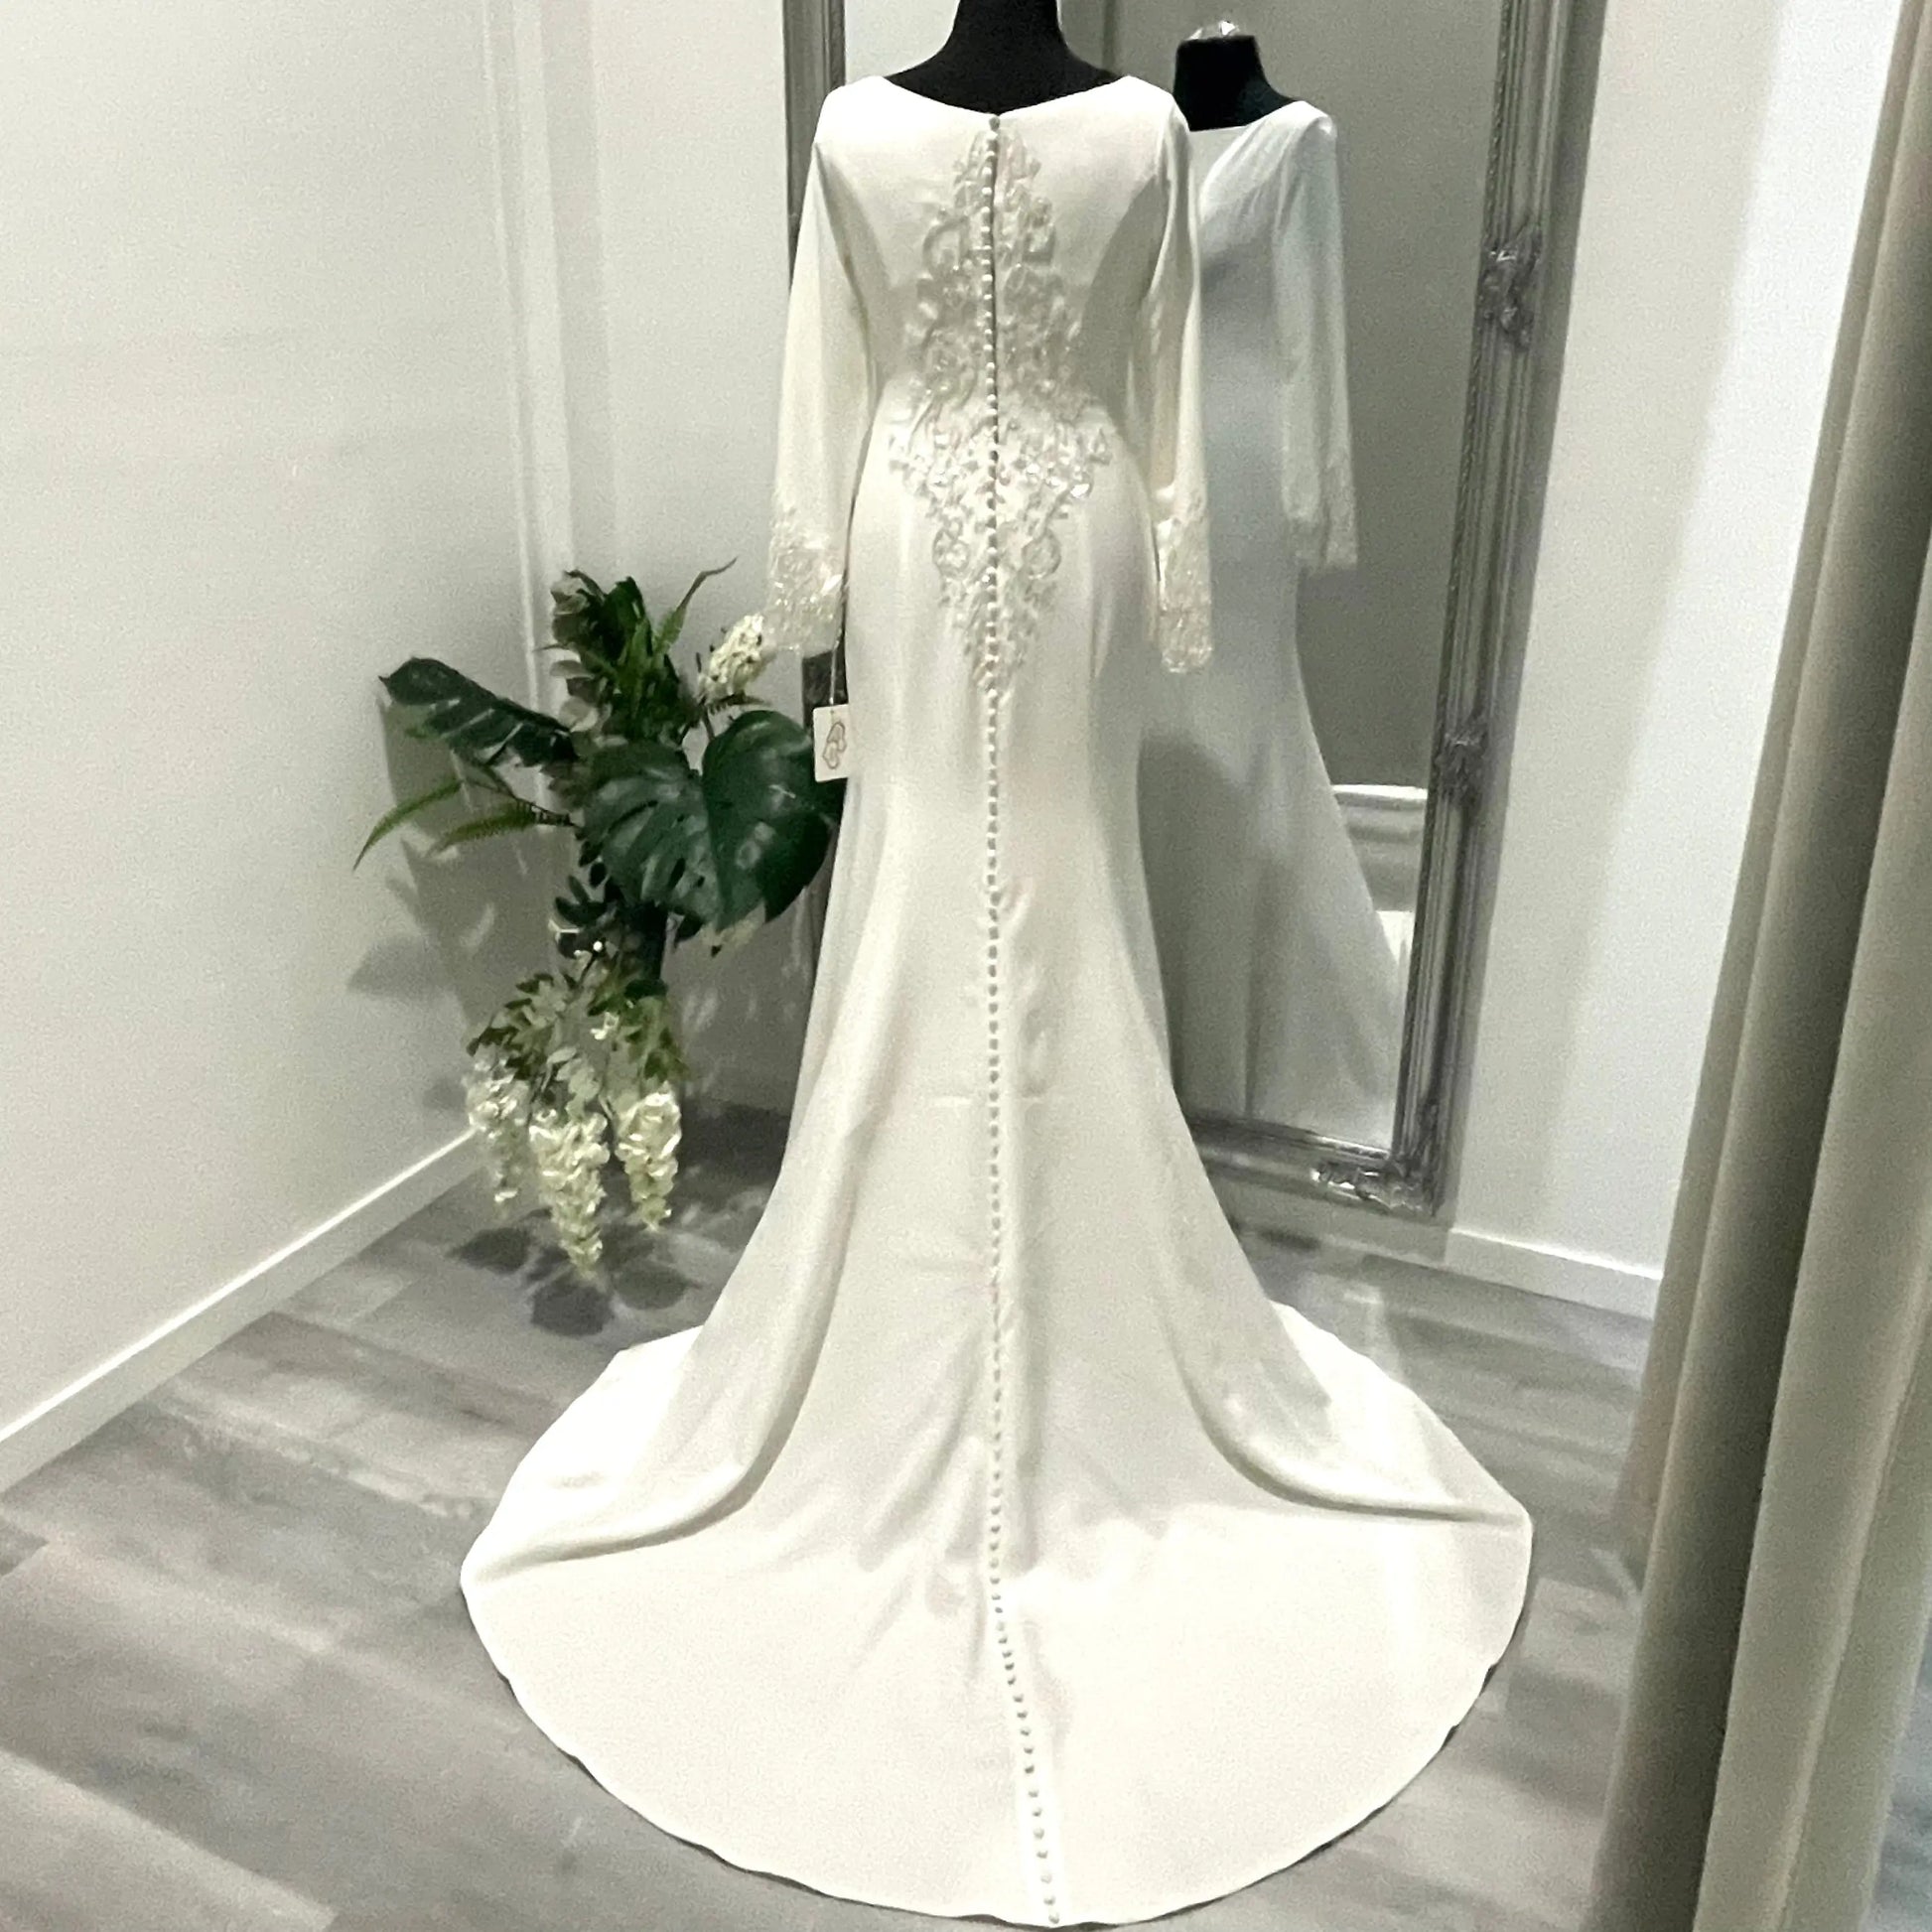 Back view of the Krysta wedding gown showcasing its intricate lace appliqué and illusion bodice, embodying classic bridal charm and timeless elegance.